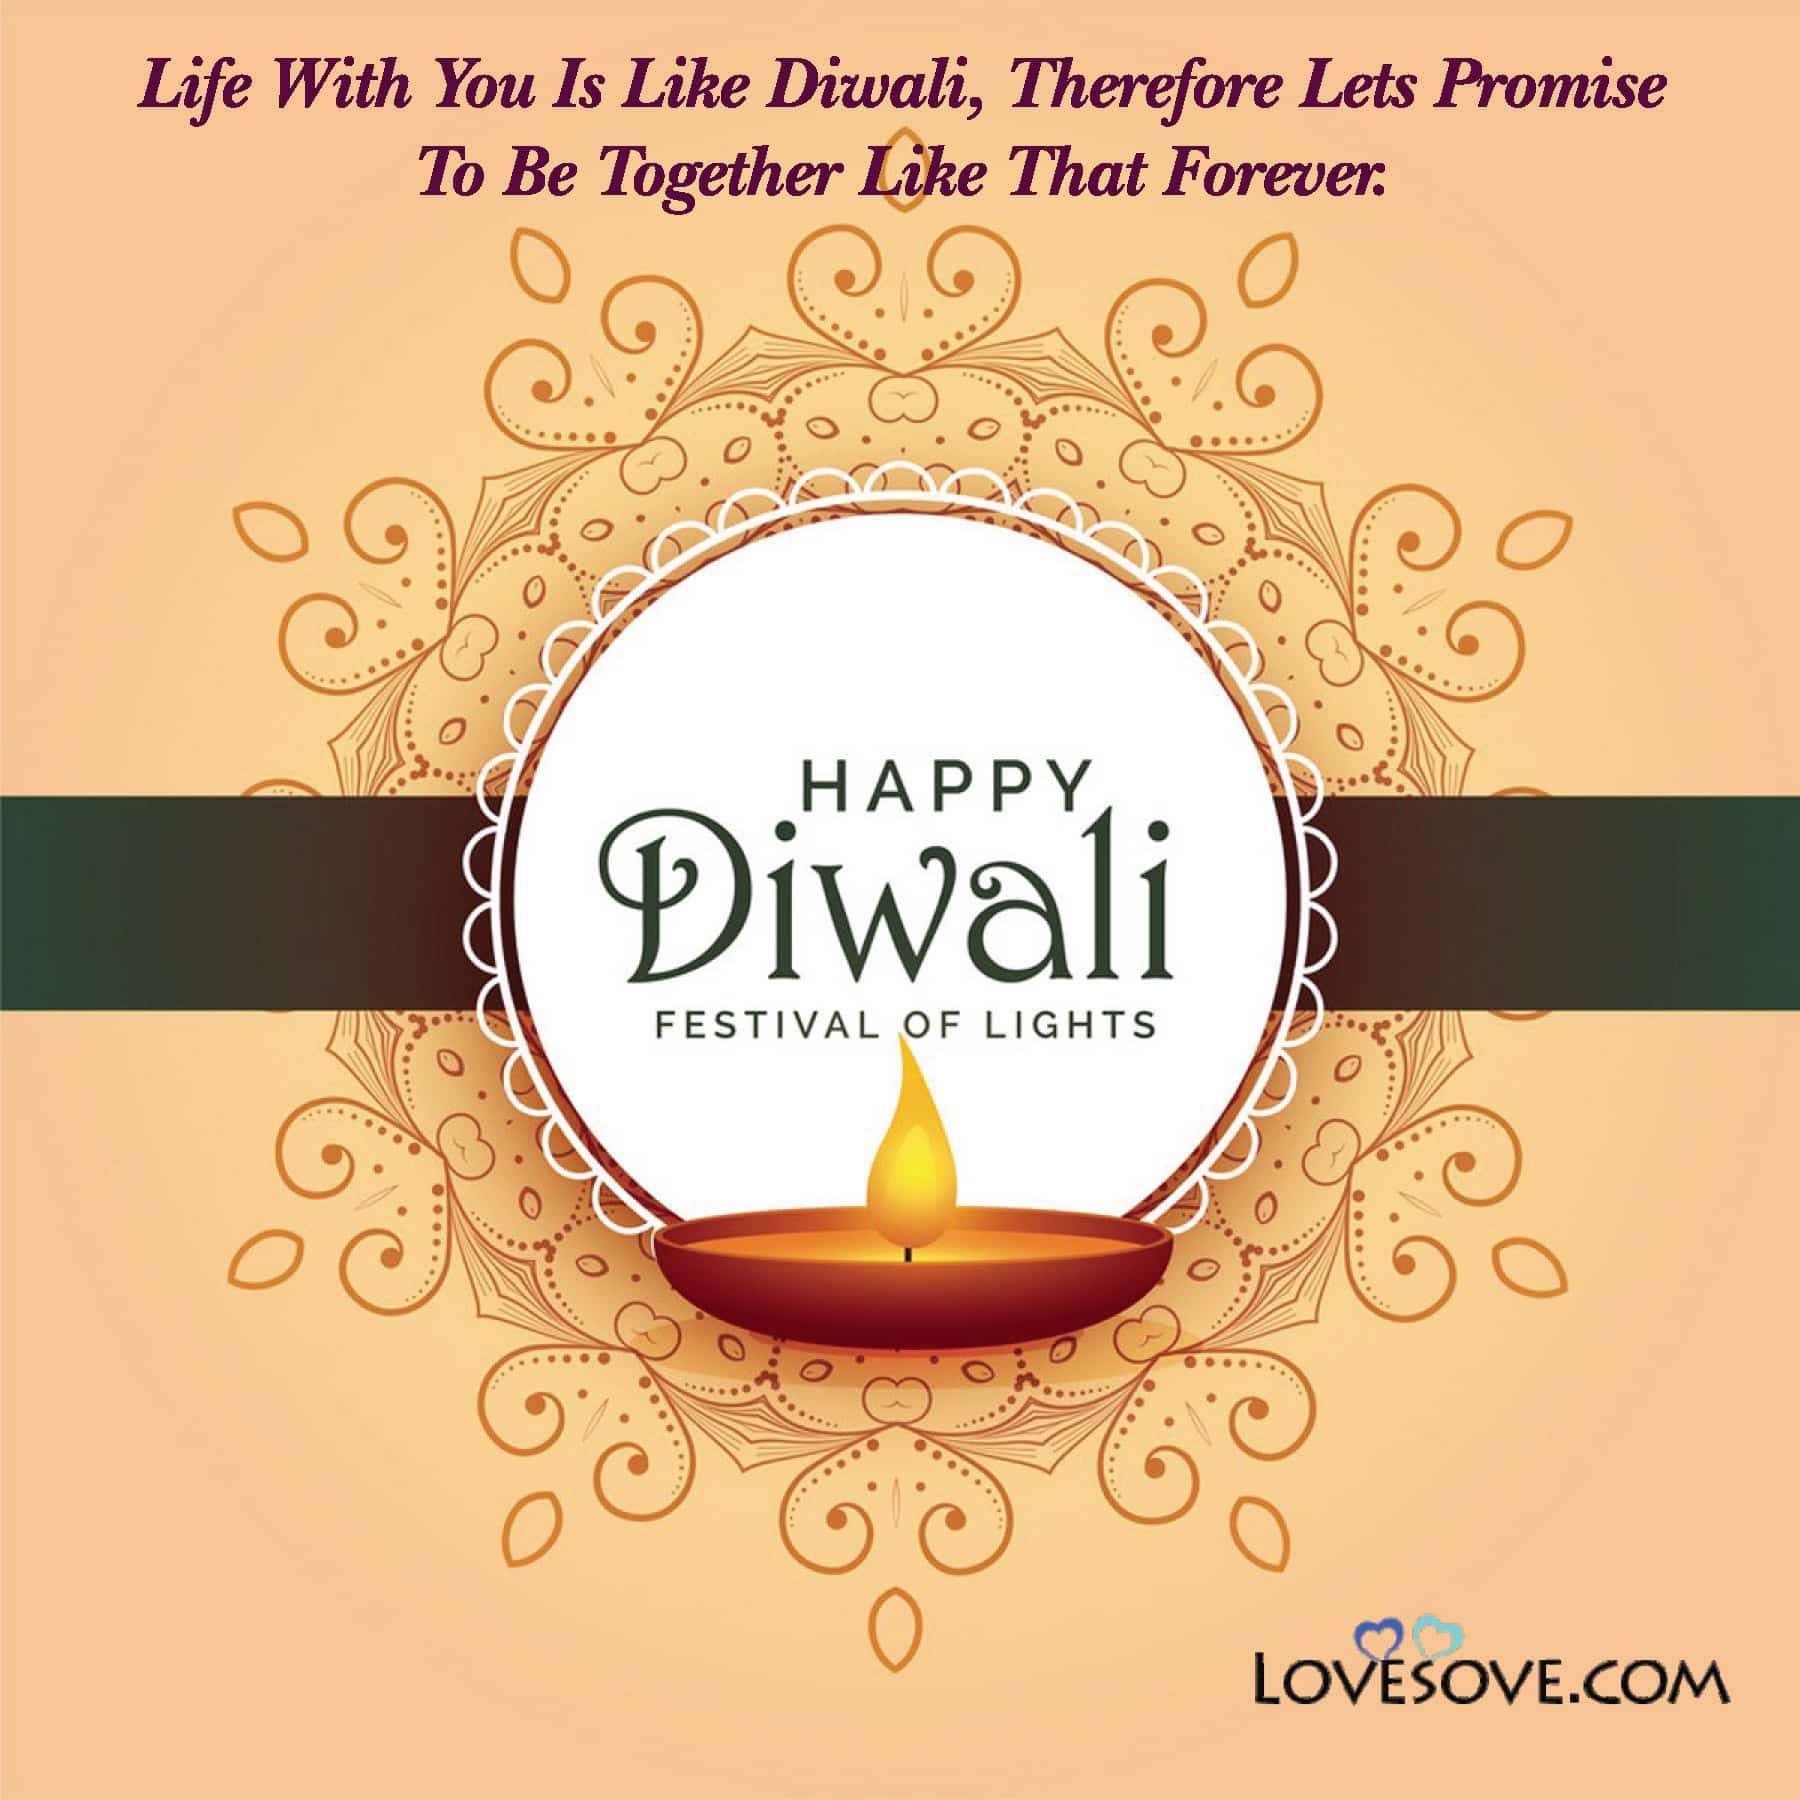 Happy Diwali Quotes And Sayings, Happy Diwali Images With Beautiful Quotes, Happy Diwali Awesome Quotes, Happy Diwali Positive Quotes, Happy Diwali Hindi Quotes Images,Happy Diwali My Love Quotes, Happy Diwali Picture Quotes, Happy Diwali Quotes And Wishes, Happy Diwali Quotes For My Love,